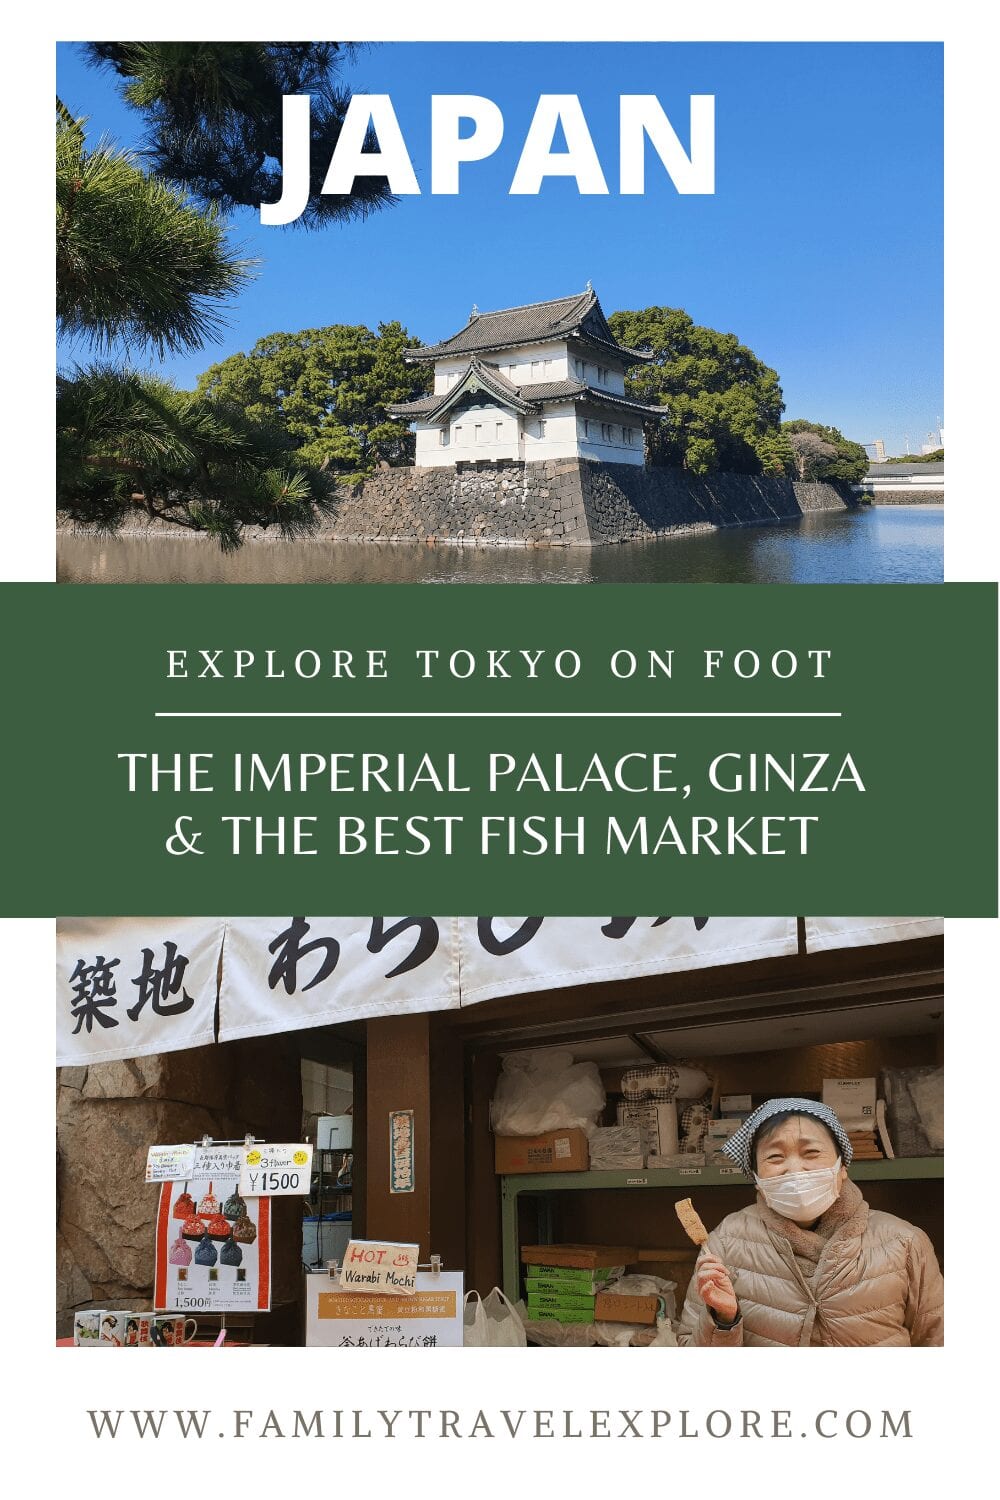 Ginza, The Imperial Palace, & The Best Fish Market In Tokyo